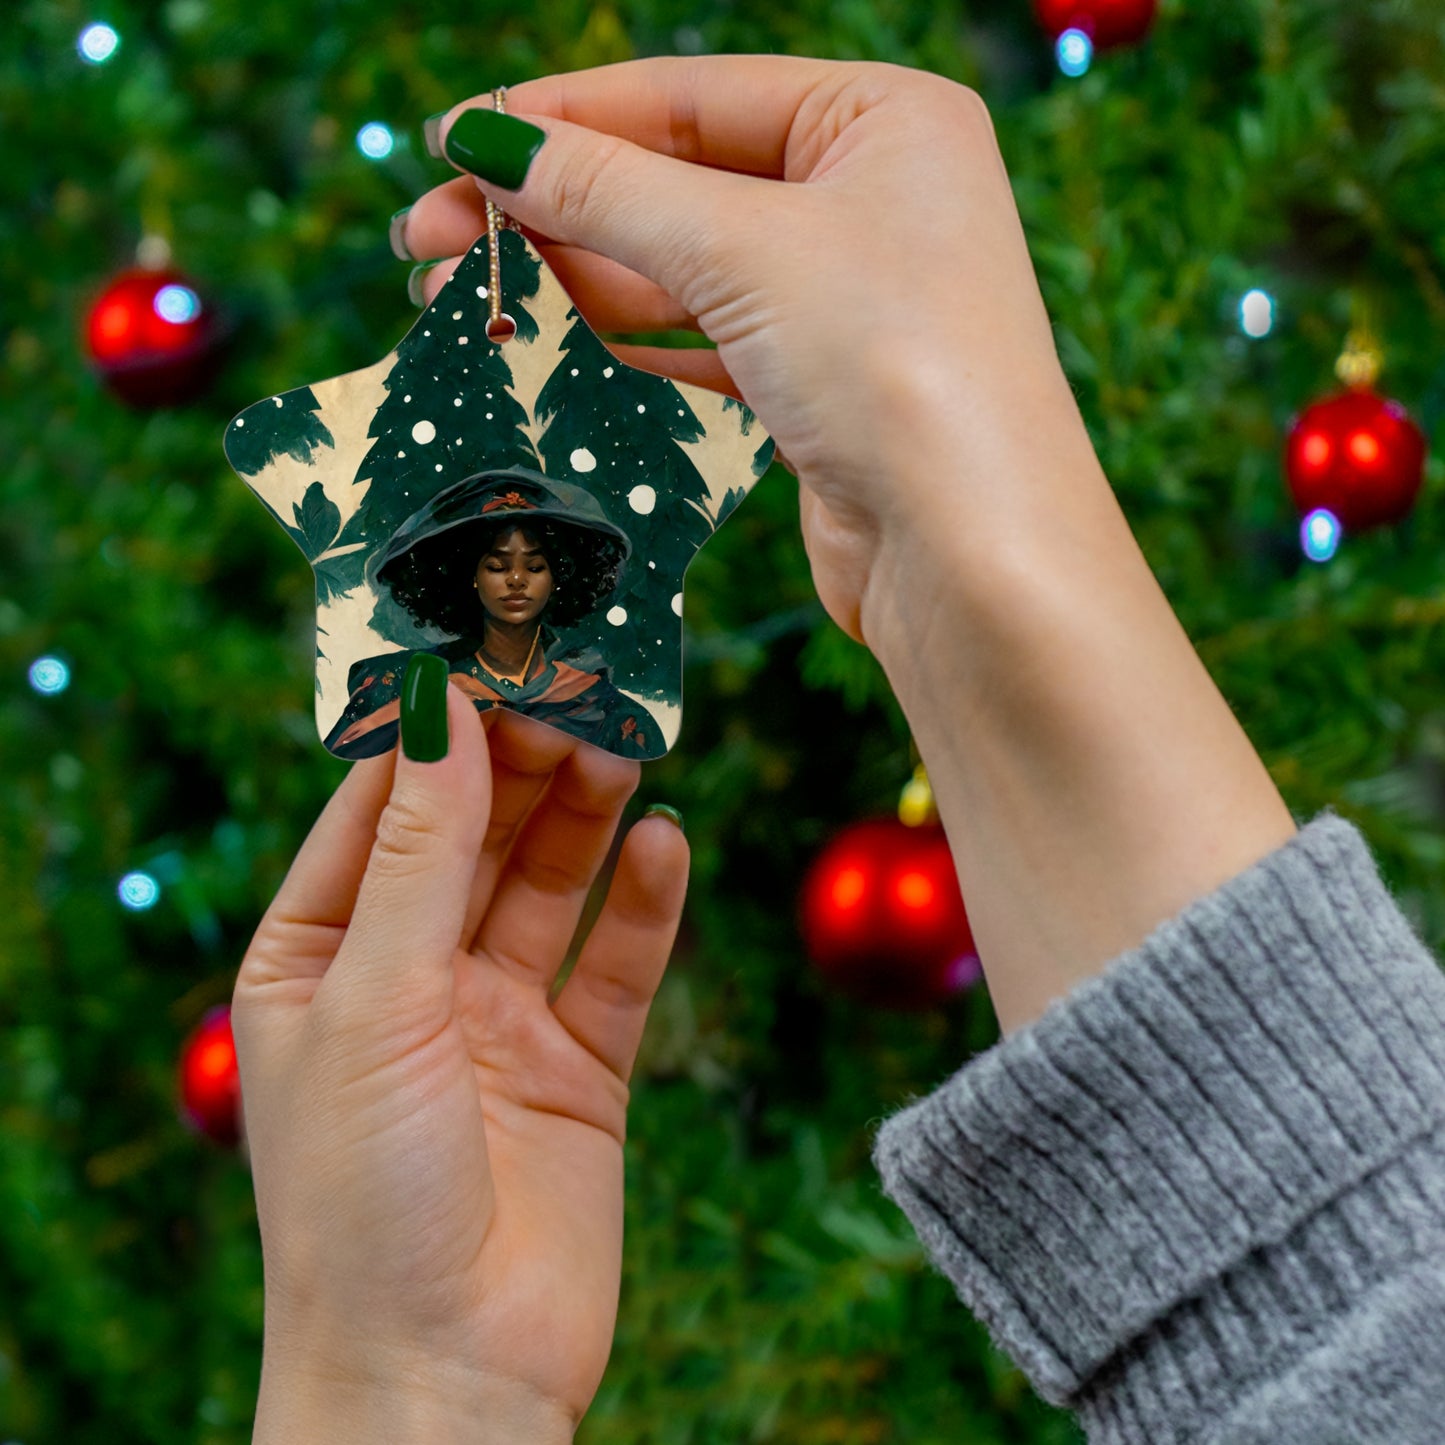 Yule Ornament - CERAMIC Witch with Pine Trees Yule Ornament - Blessed Yule! For Yule Tree, black woman, wiccan gift, pagan decor